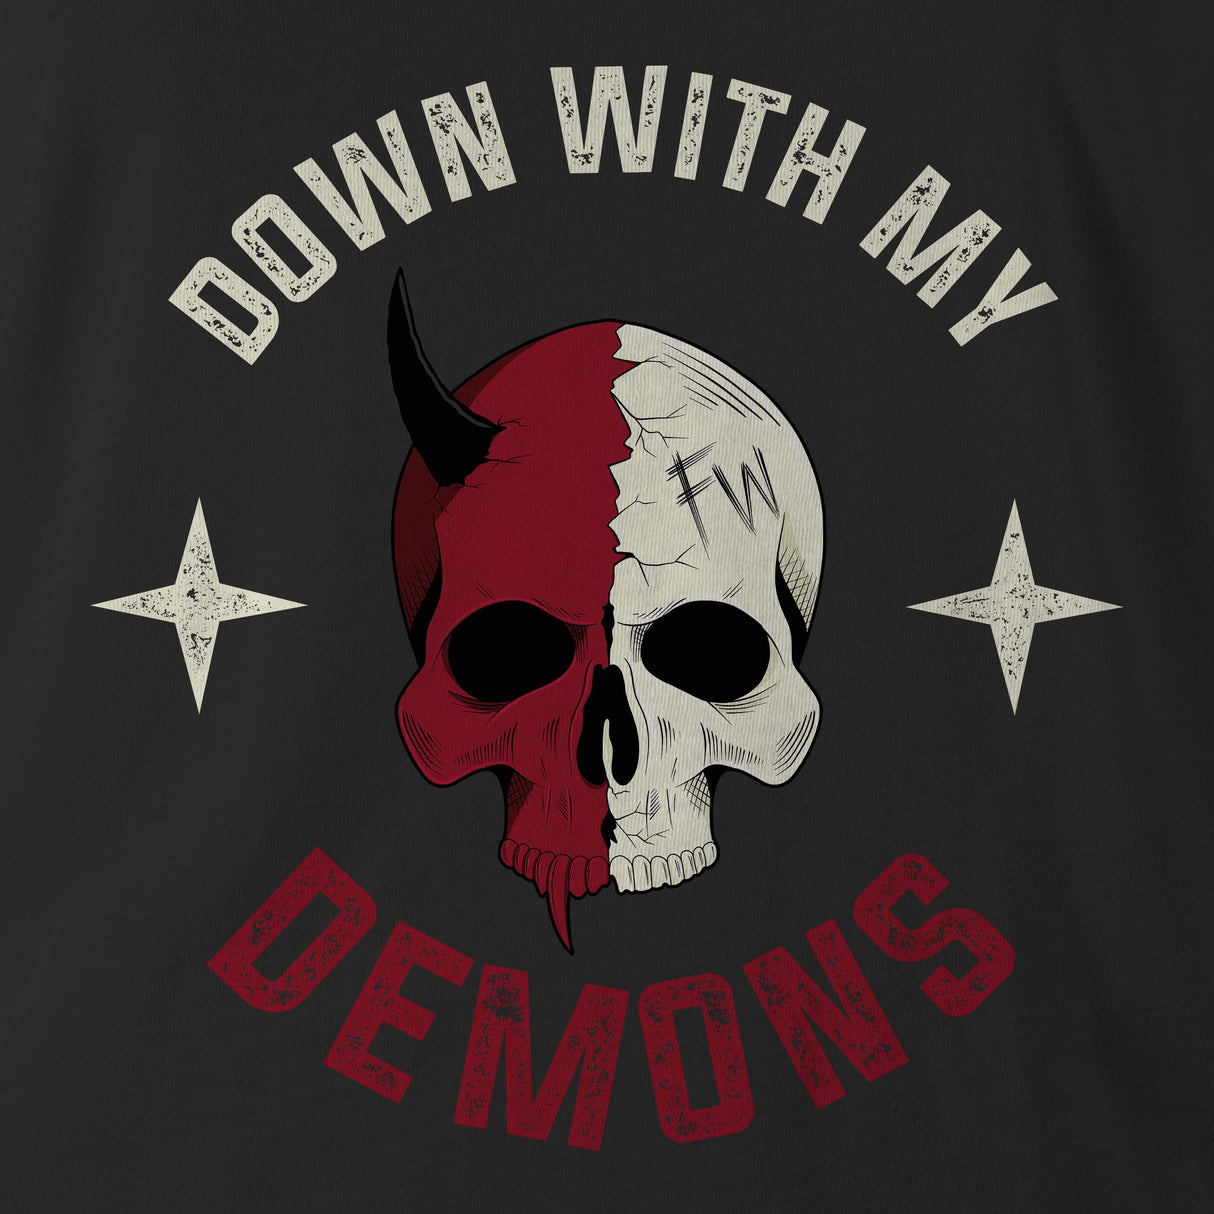 DOWN WITH MY DEMONS - Force Wear HQ